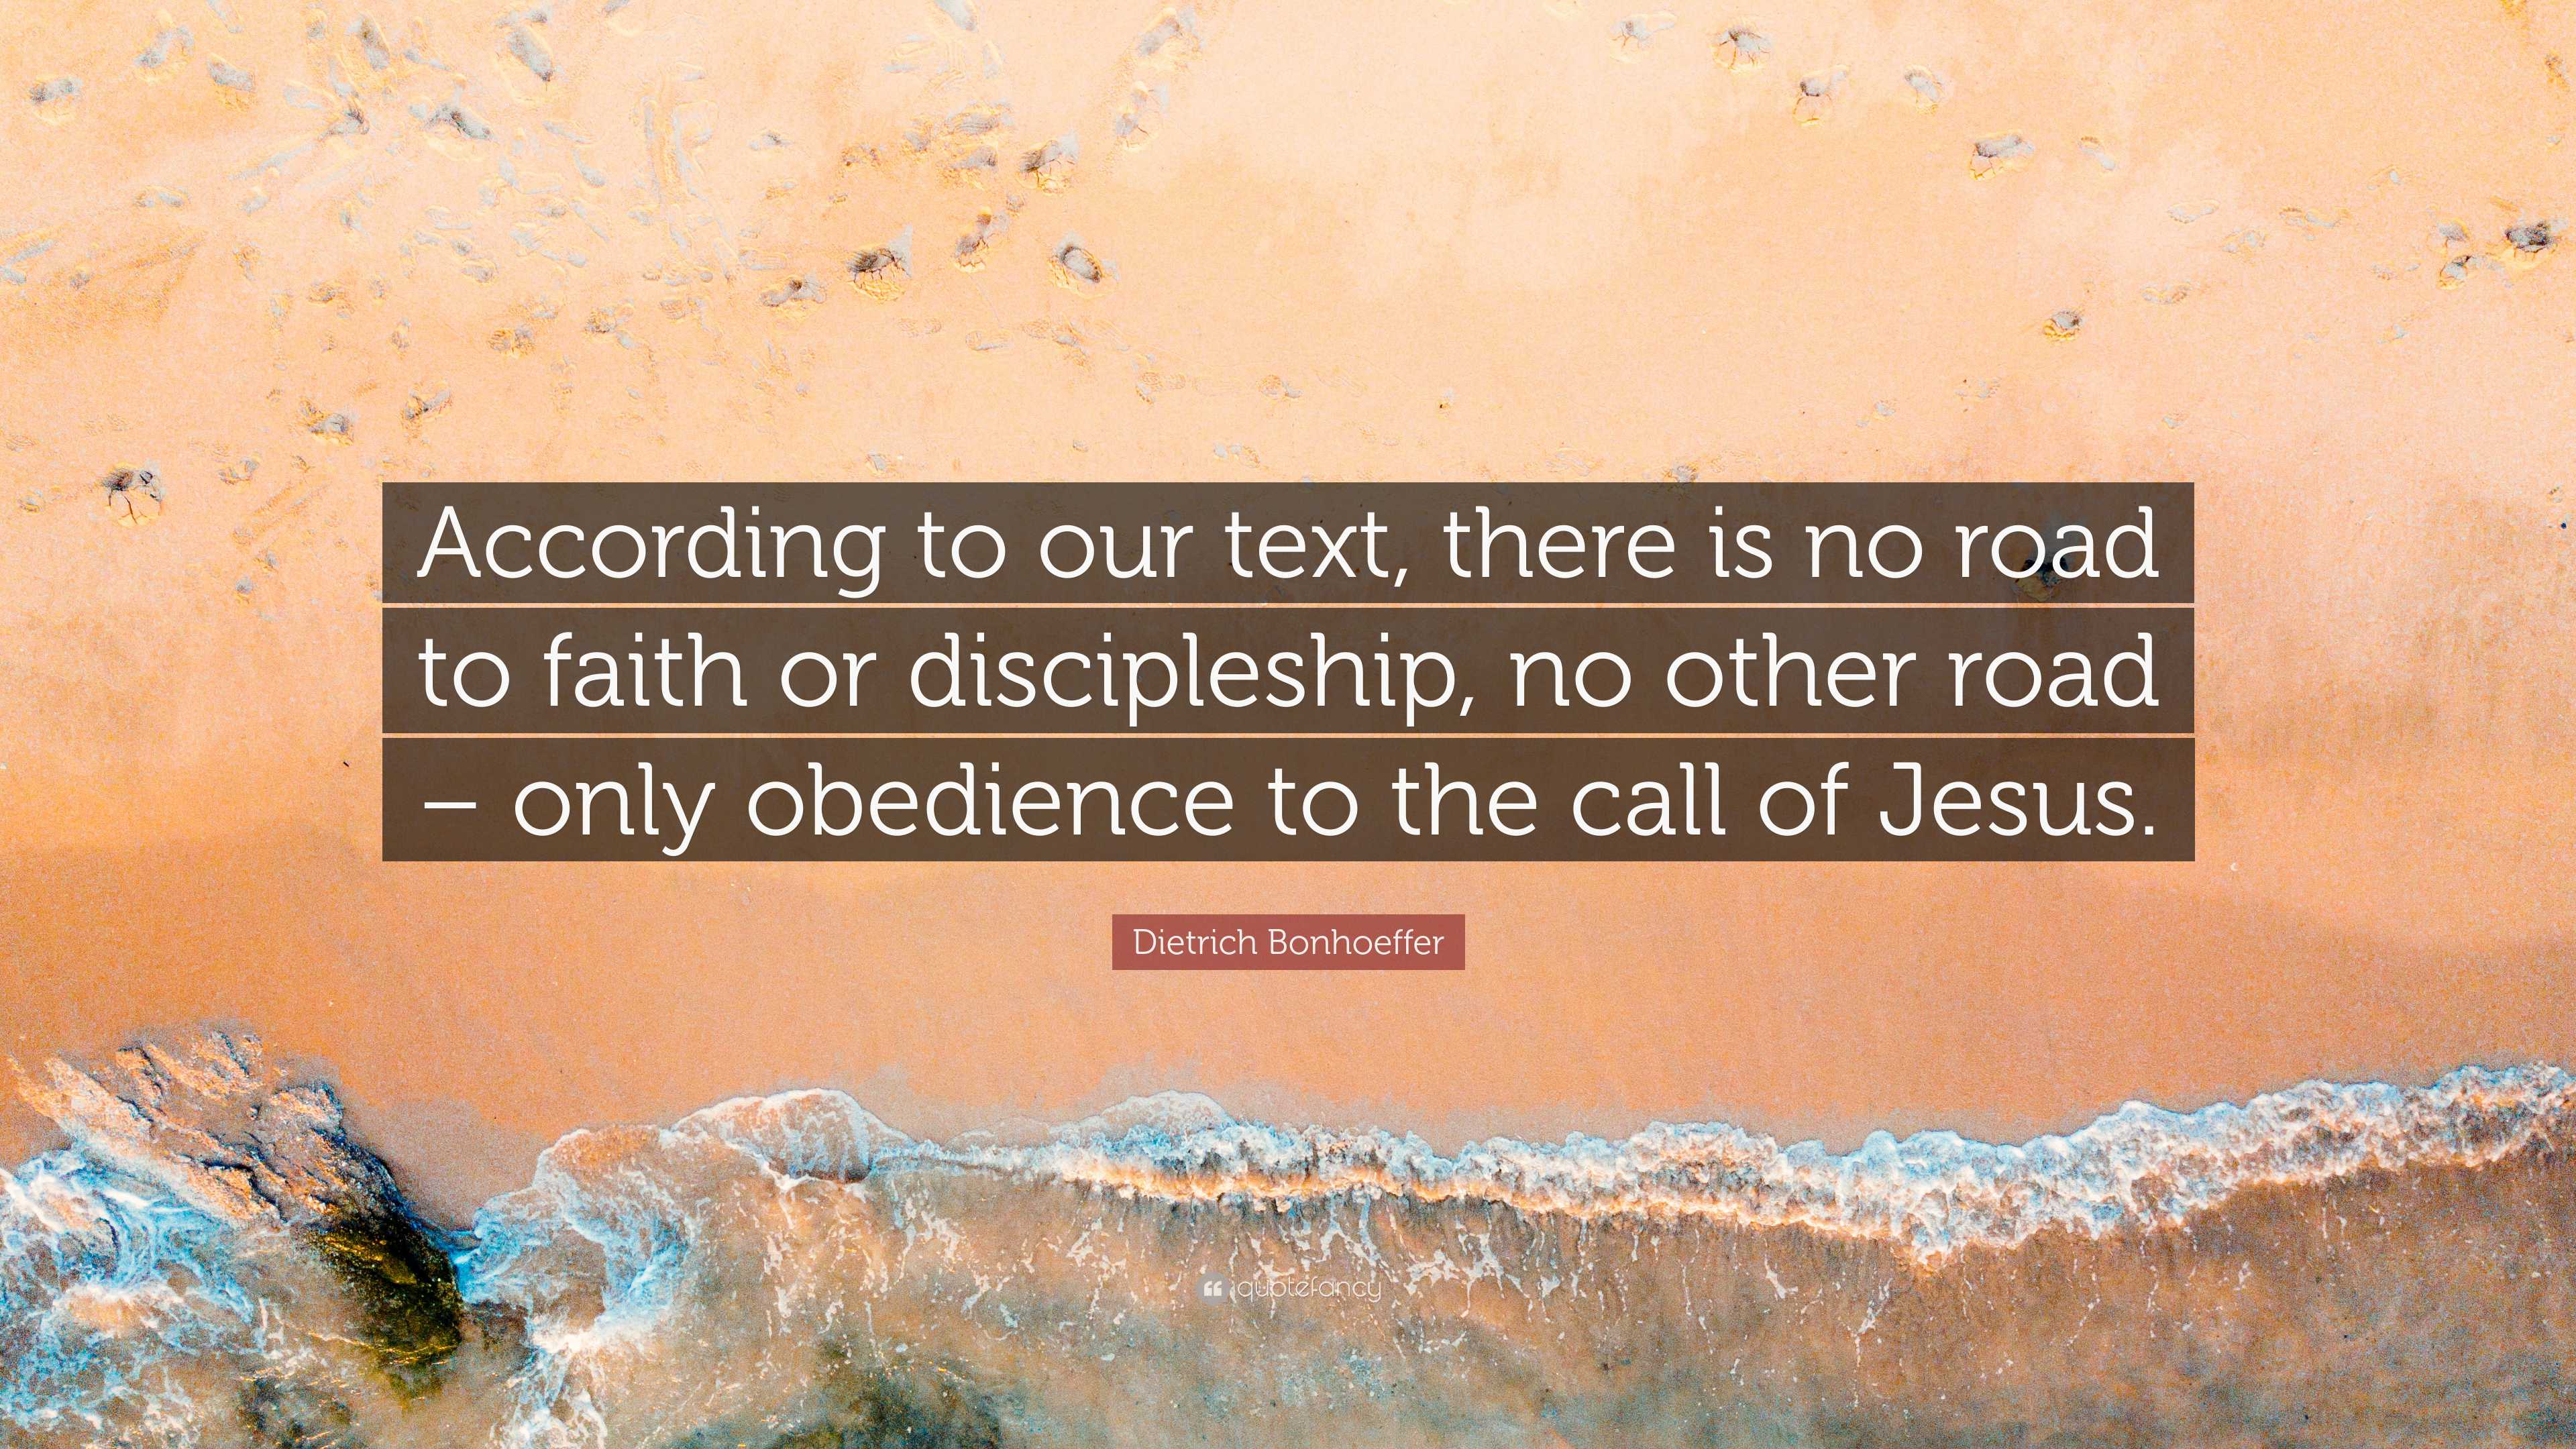 Dietrich Bonhoeffer Quote: “According to our text, there is no road to ...